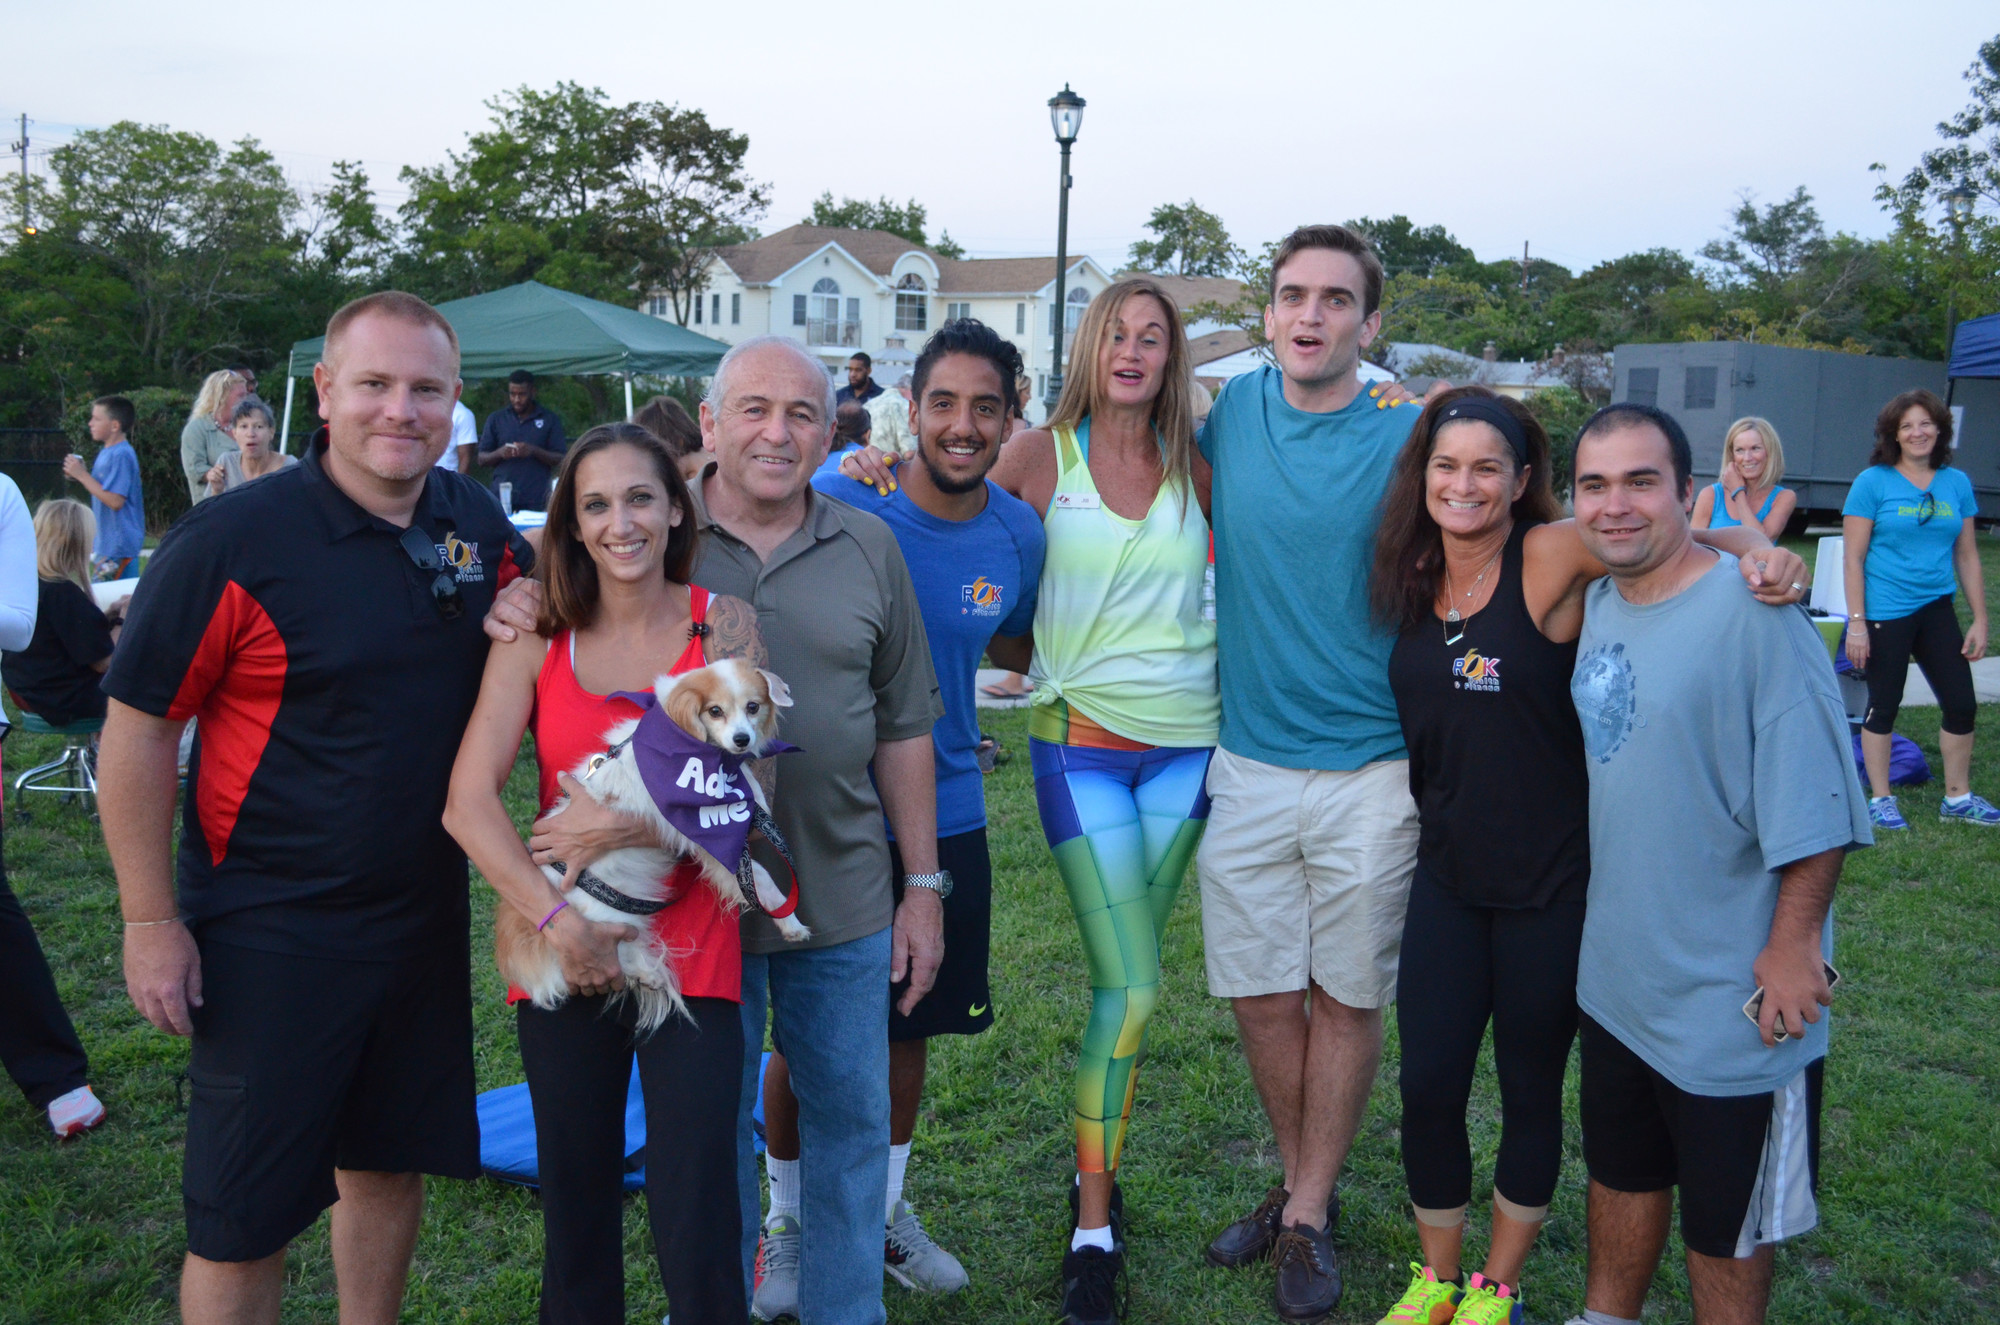 ROK Health & fitness owners and staff welcomed residents to the festival. Pictured from left were Michael Hawksby, Krista Risolo (holding Norman the dog), Robert D’Urso, Juan Cano, Jill Markowski, Craig D’Urso, Megan Griffo and Michael Lumi.